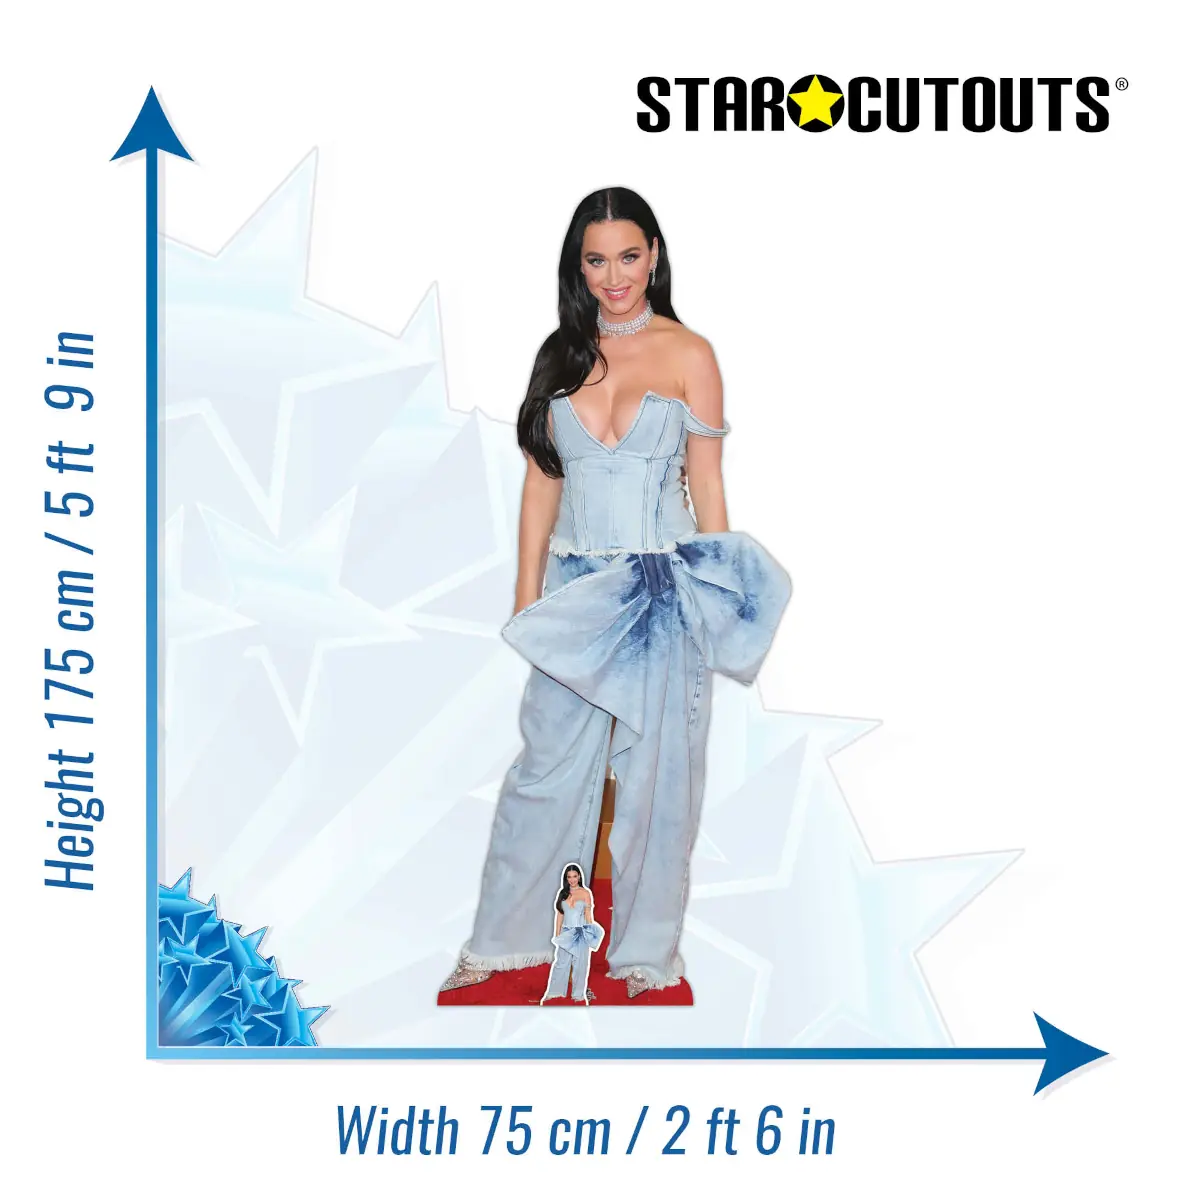 Katy Perry American Singer Songwriter Lifesize + Mini Cardboard Cutout Size